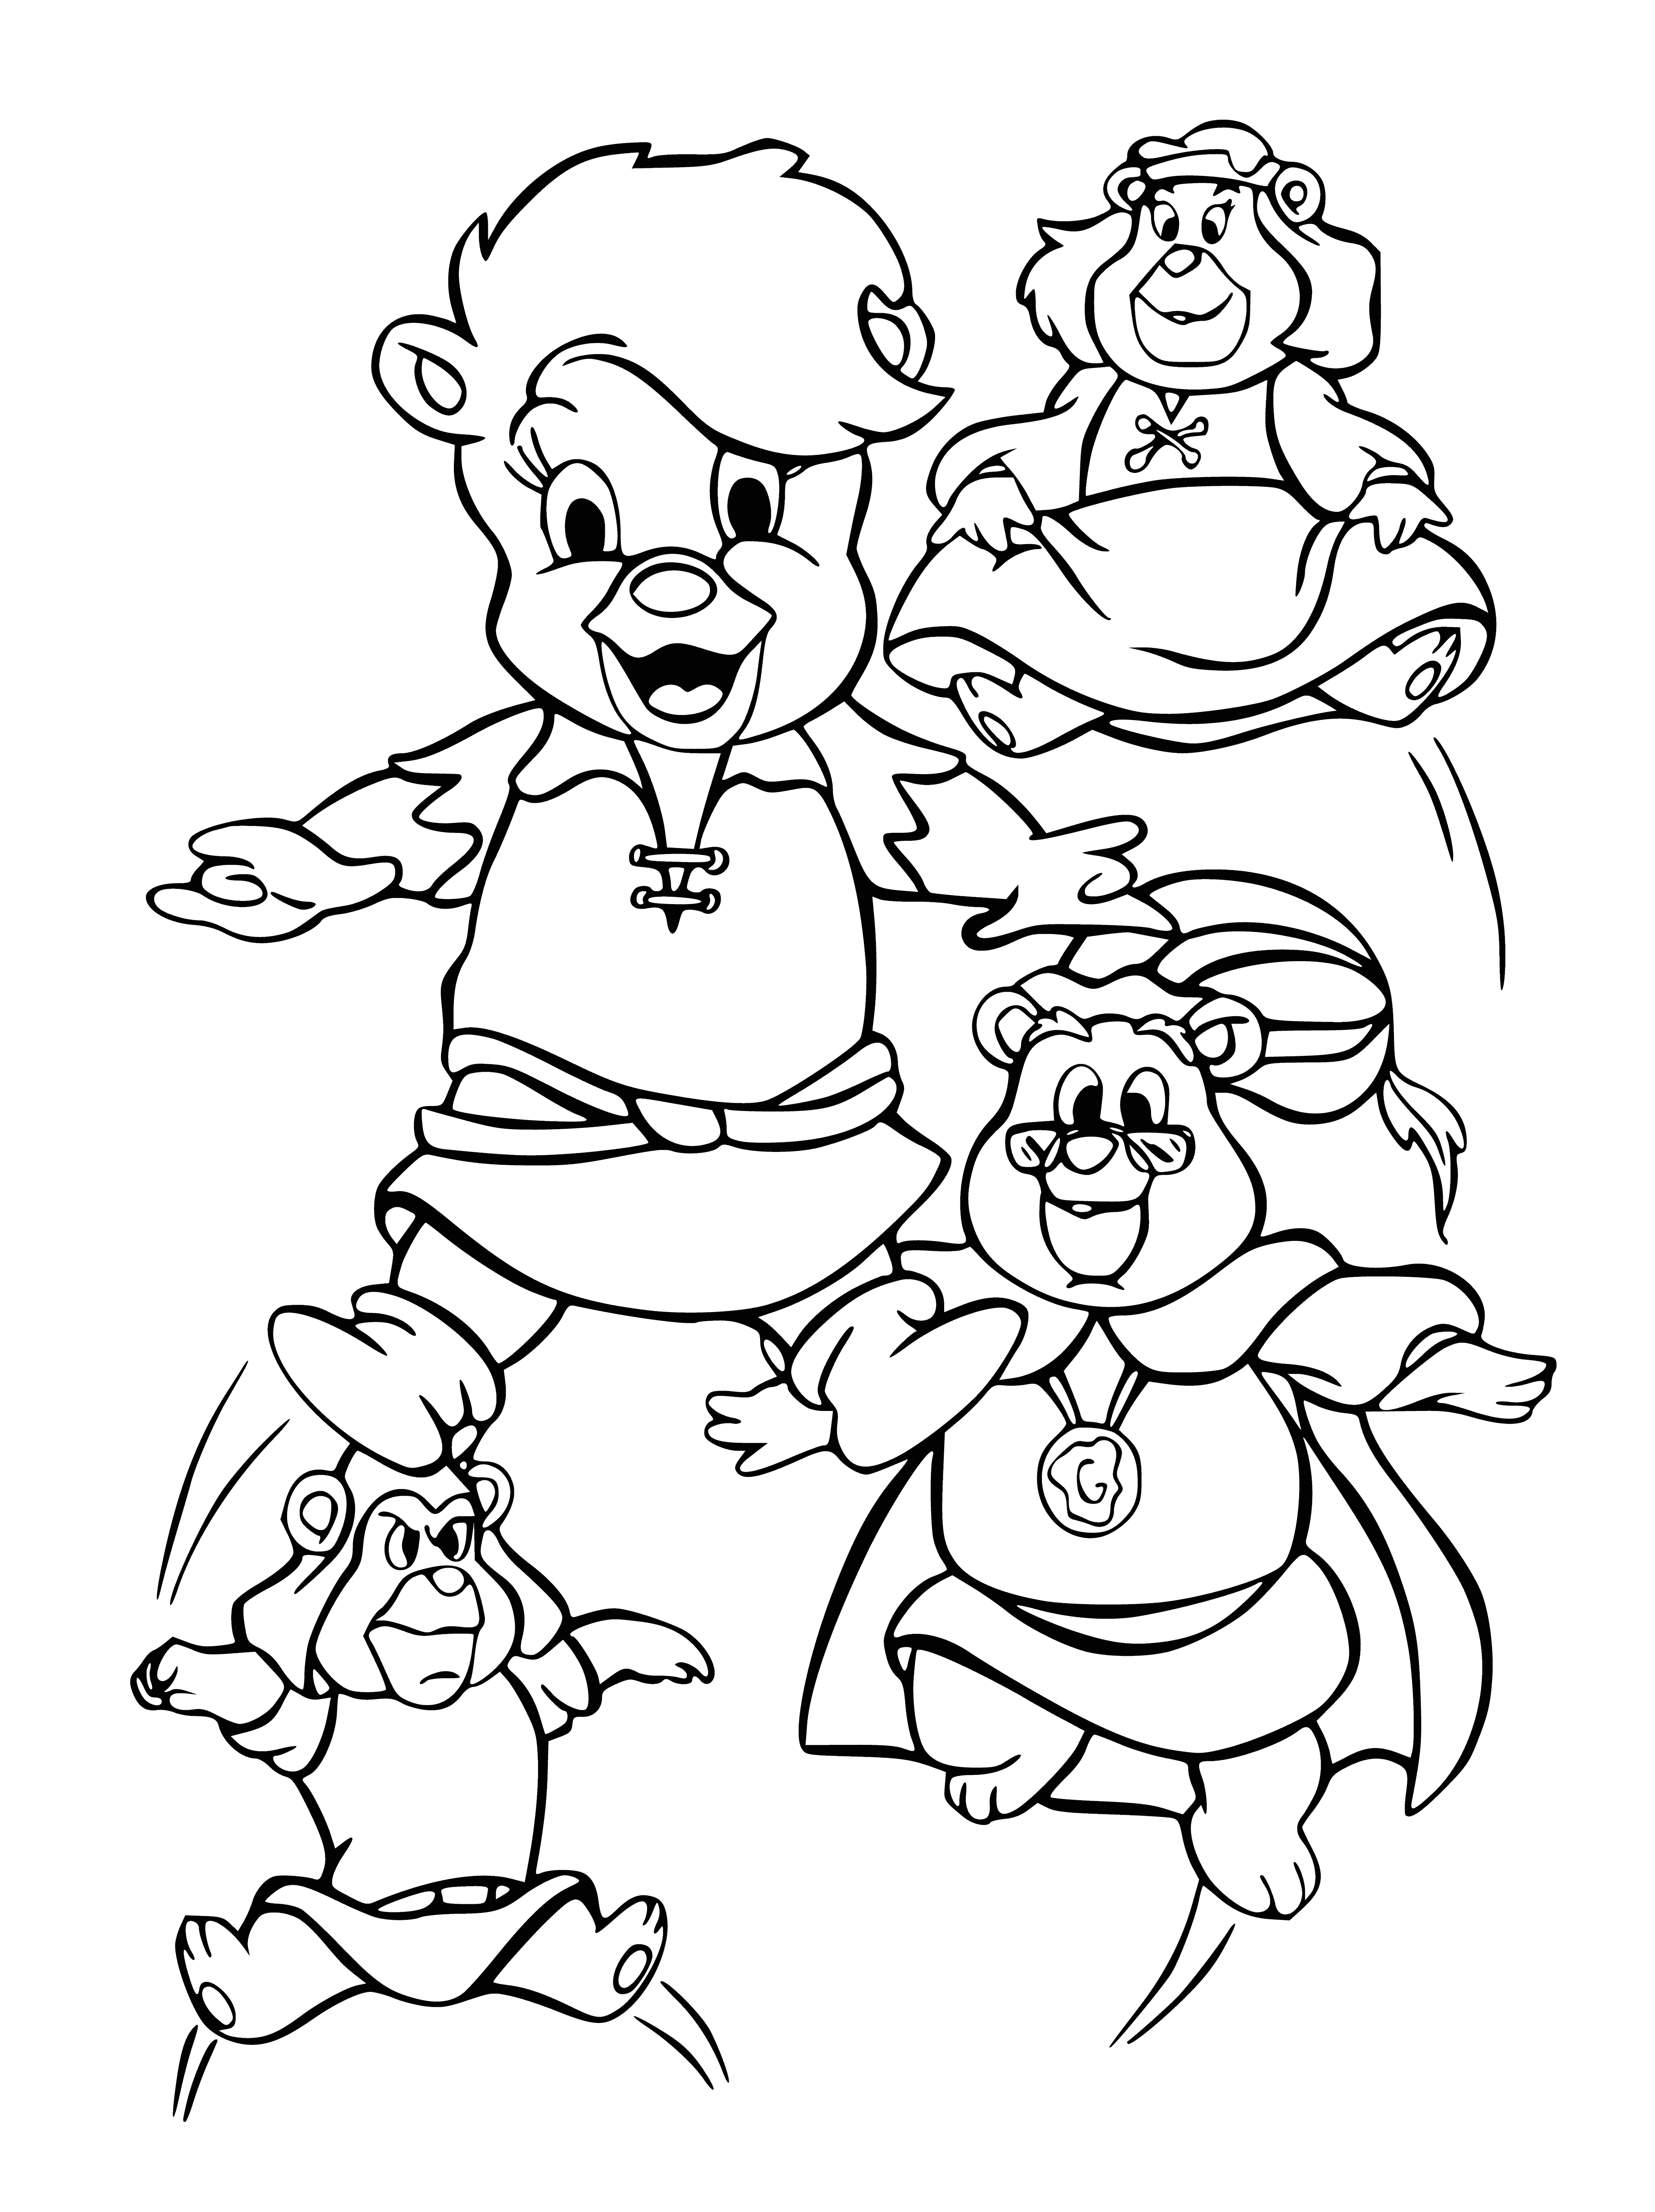 coloring page: Three bears jump in a coloring page: one in the air with arms and legs outstretched, and two on the ground preparing to jump.